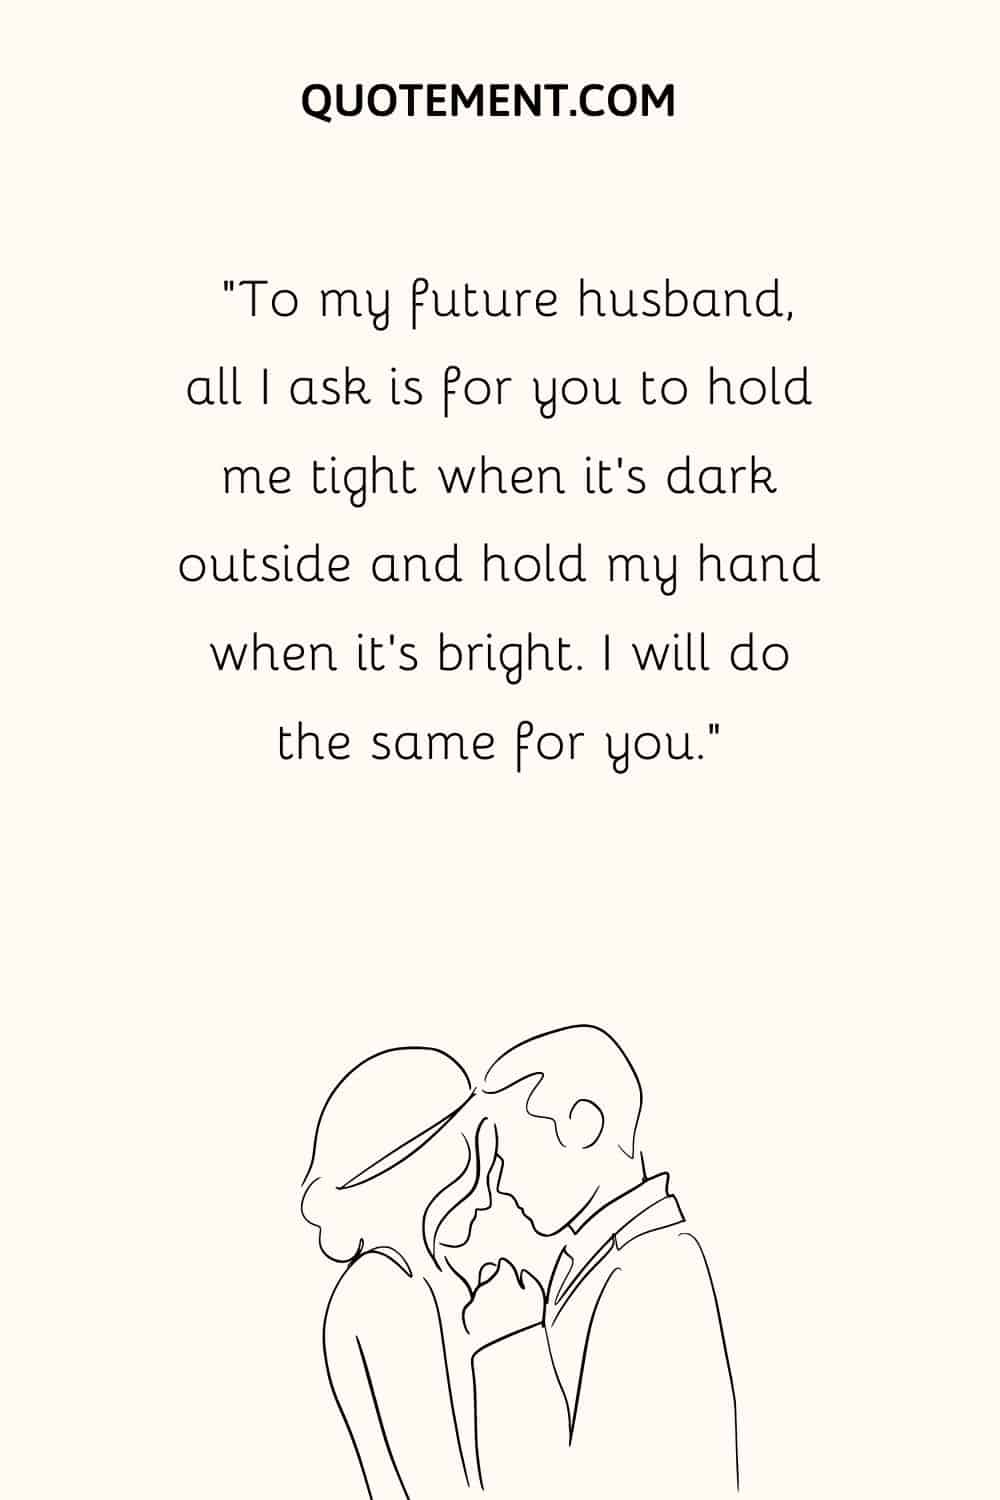 “To my future husband, all I ask is for you to hold me tight when it’s dark outside and hold my hand when it’s bright. I will do the same for you.”